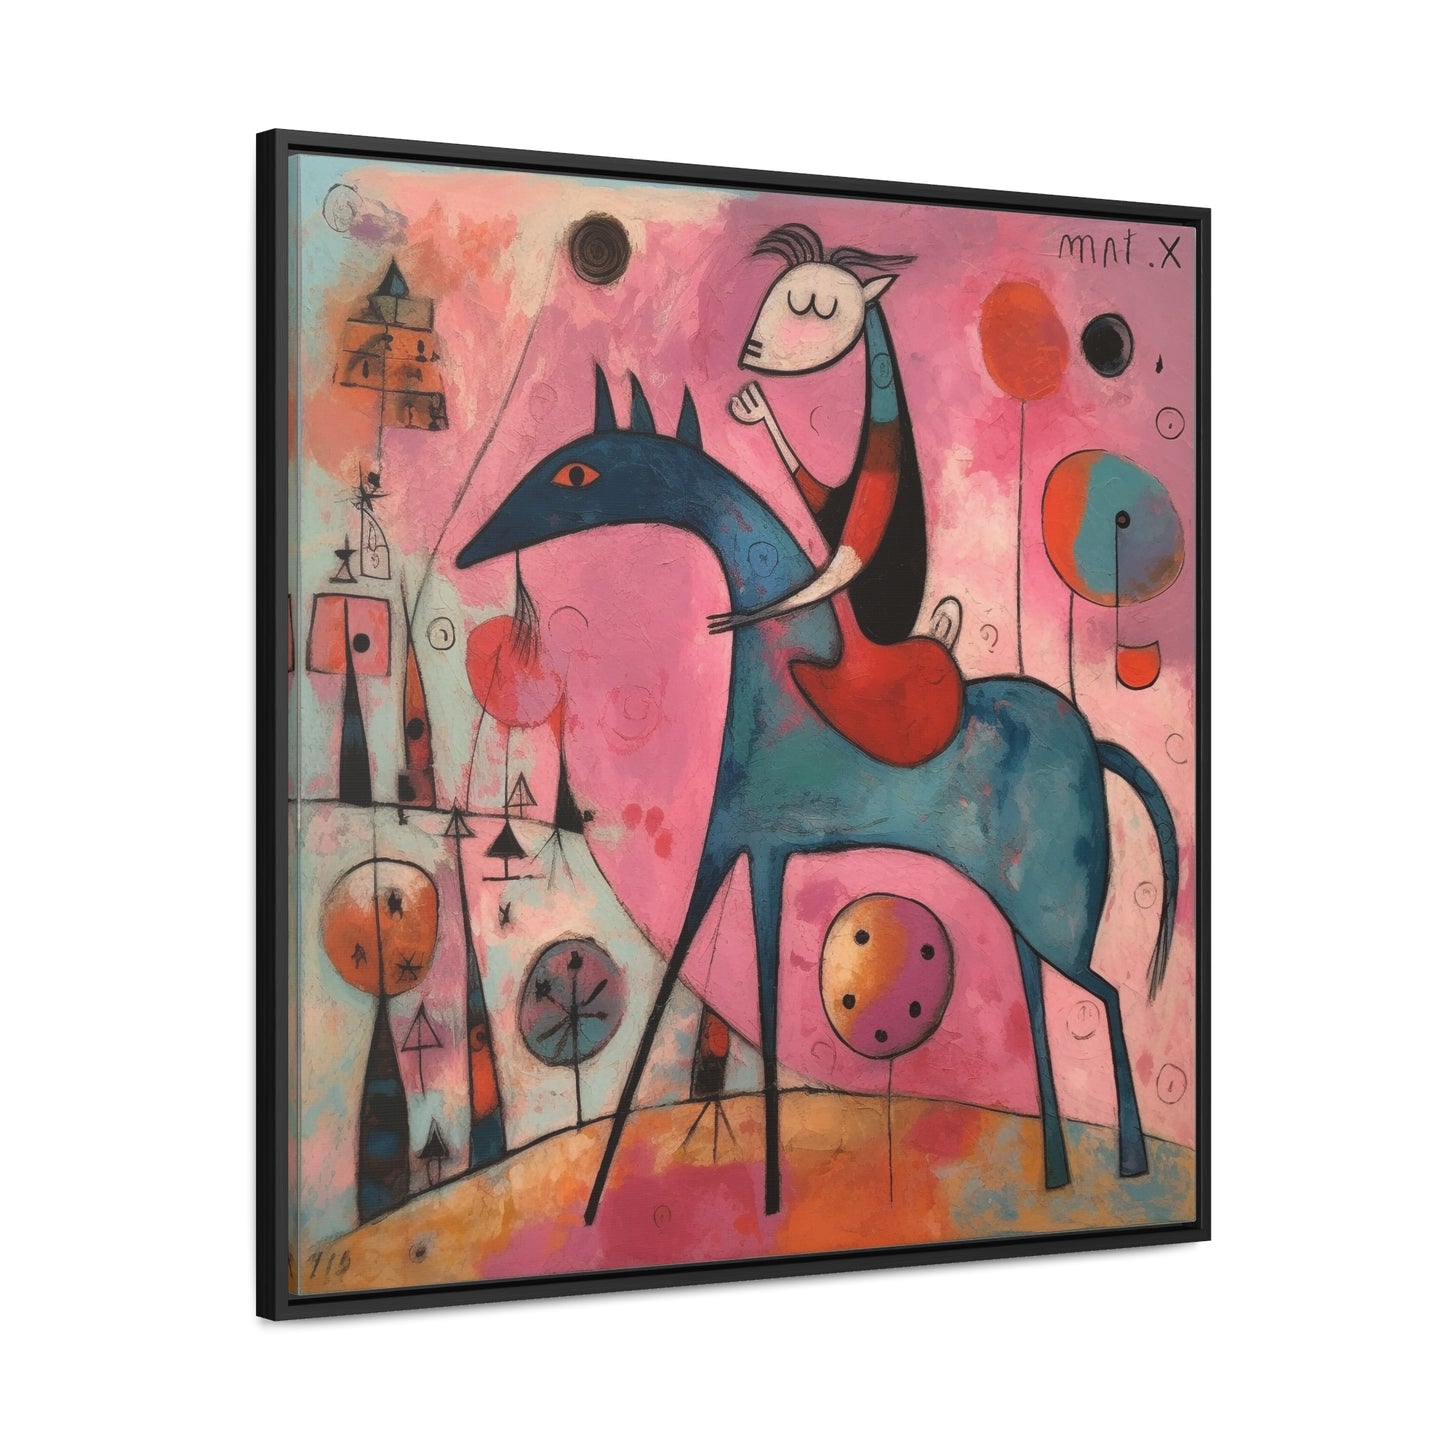 The Dreams of the Child 46, Gallery Canvas Wraps, Square Frame